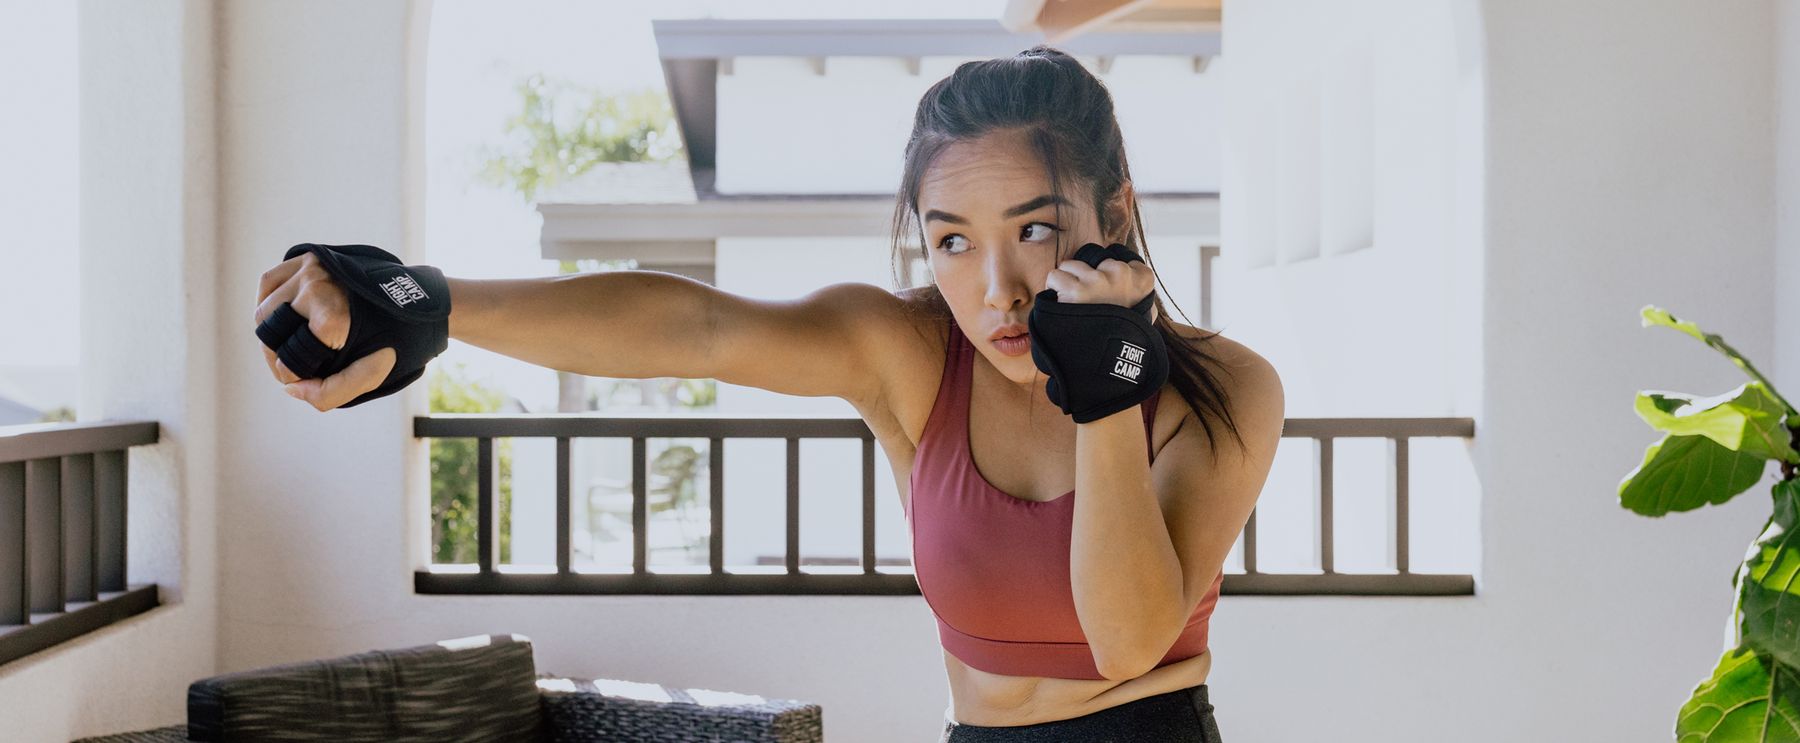 Easy New Year’s Boxing Workout For Beginners